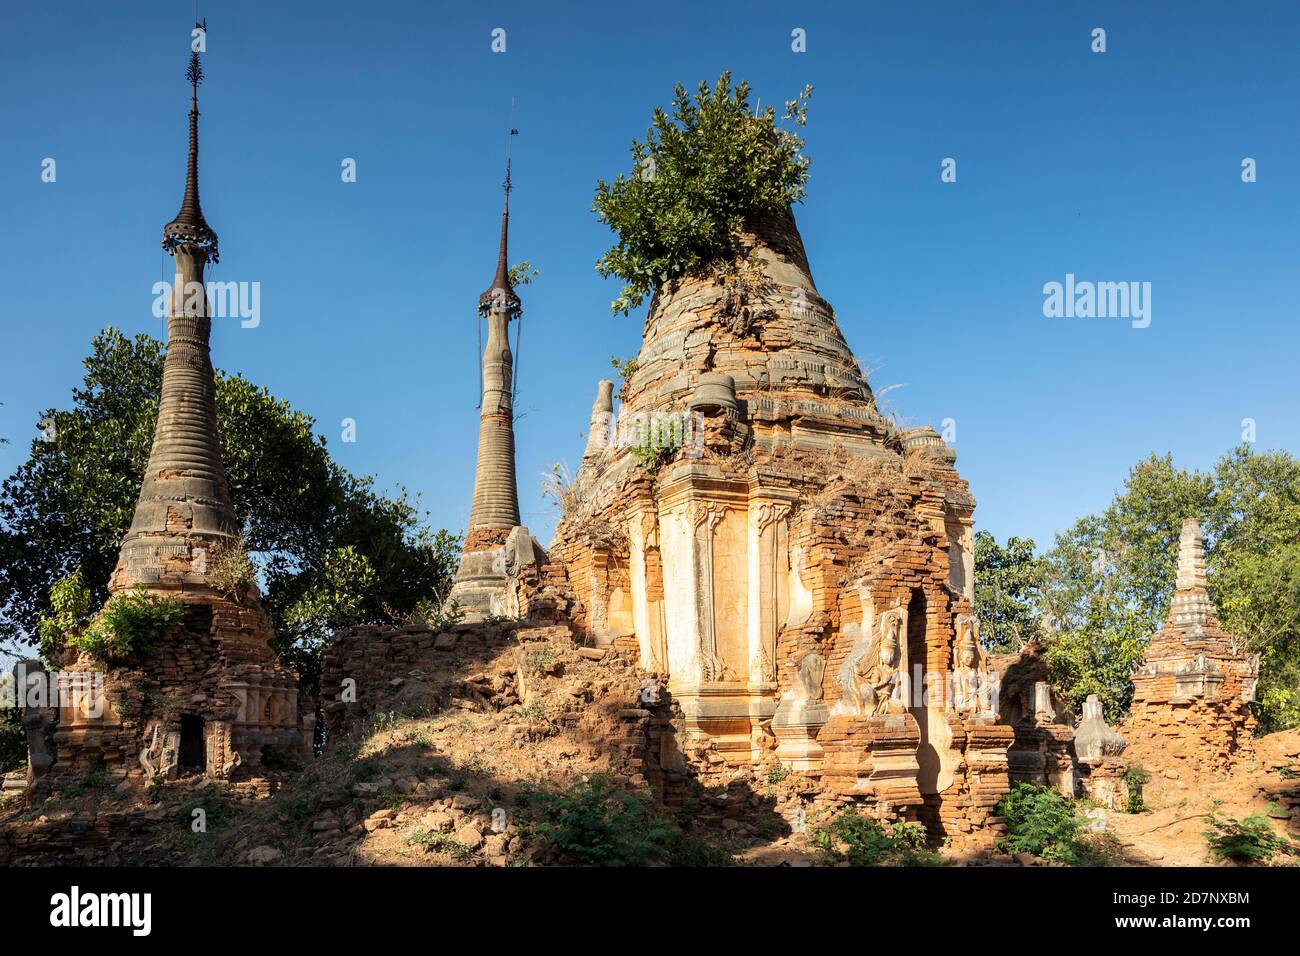 Alte Shwe Indein Pagode am Inle See, Myanmar Stockfoto